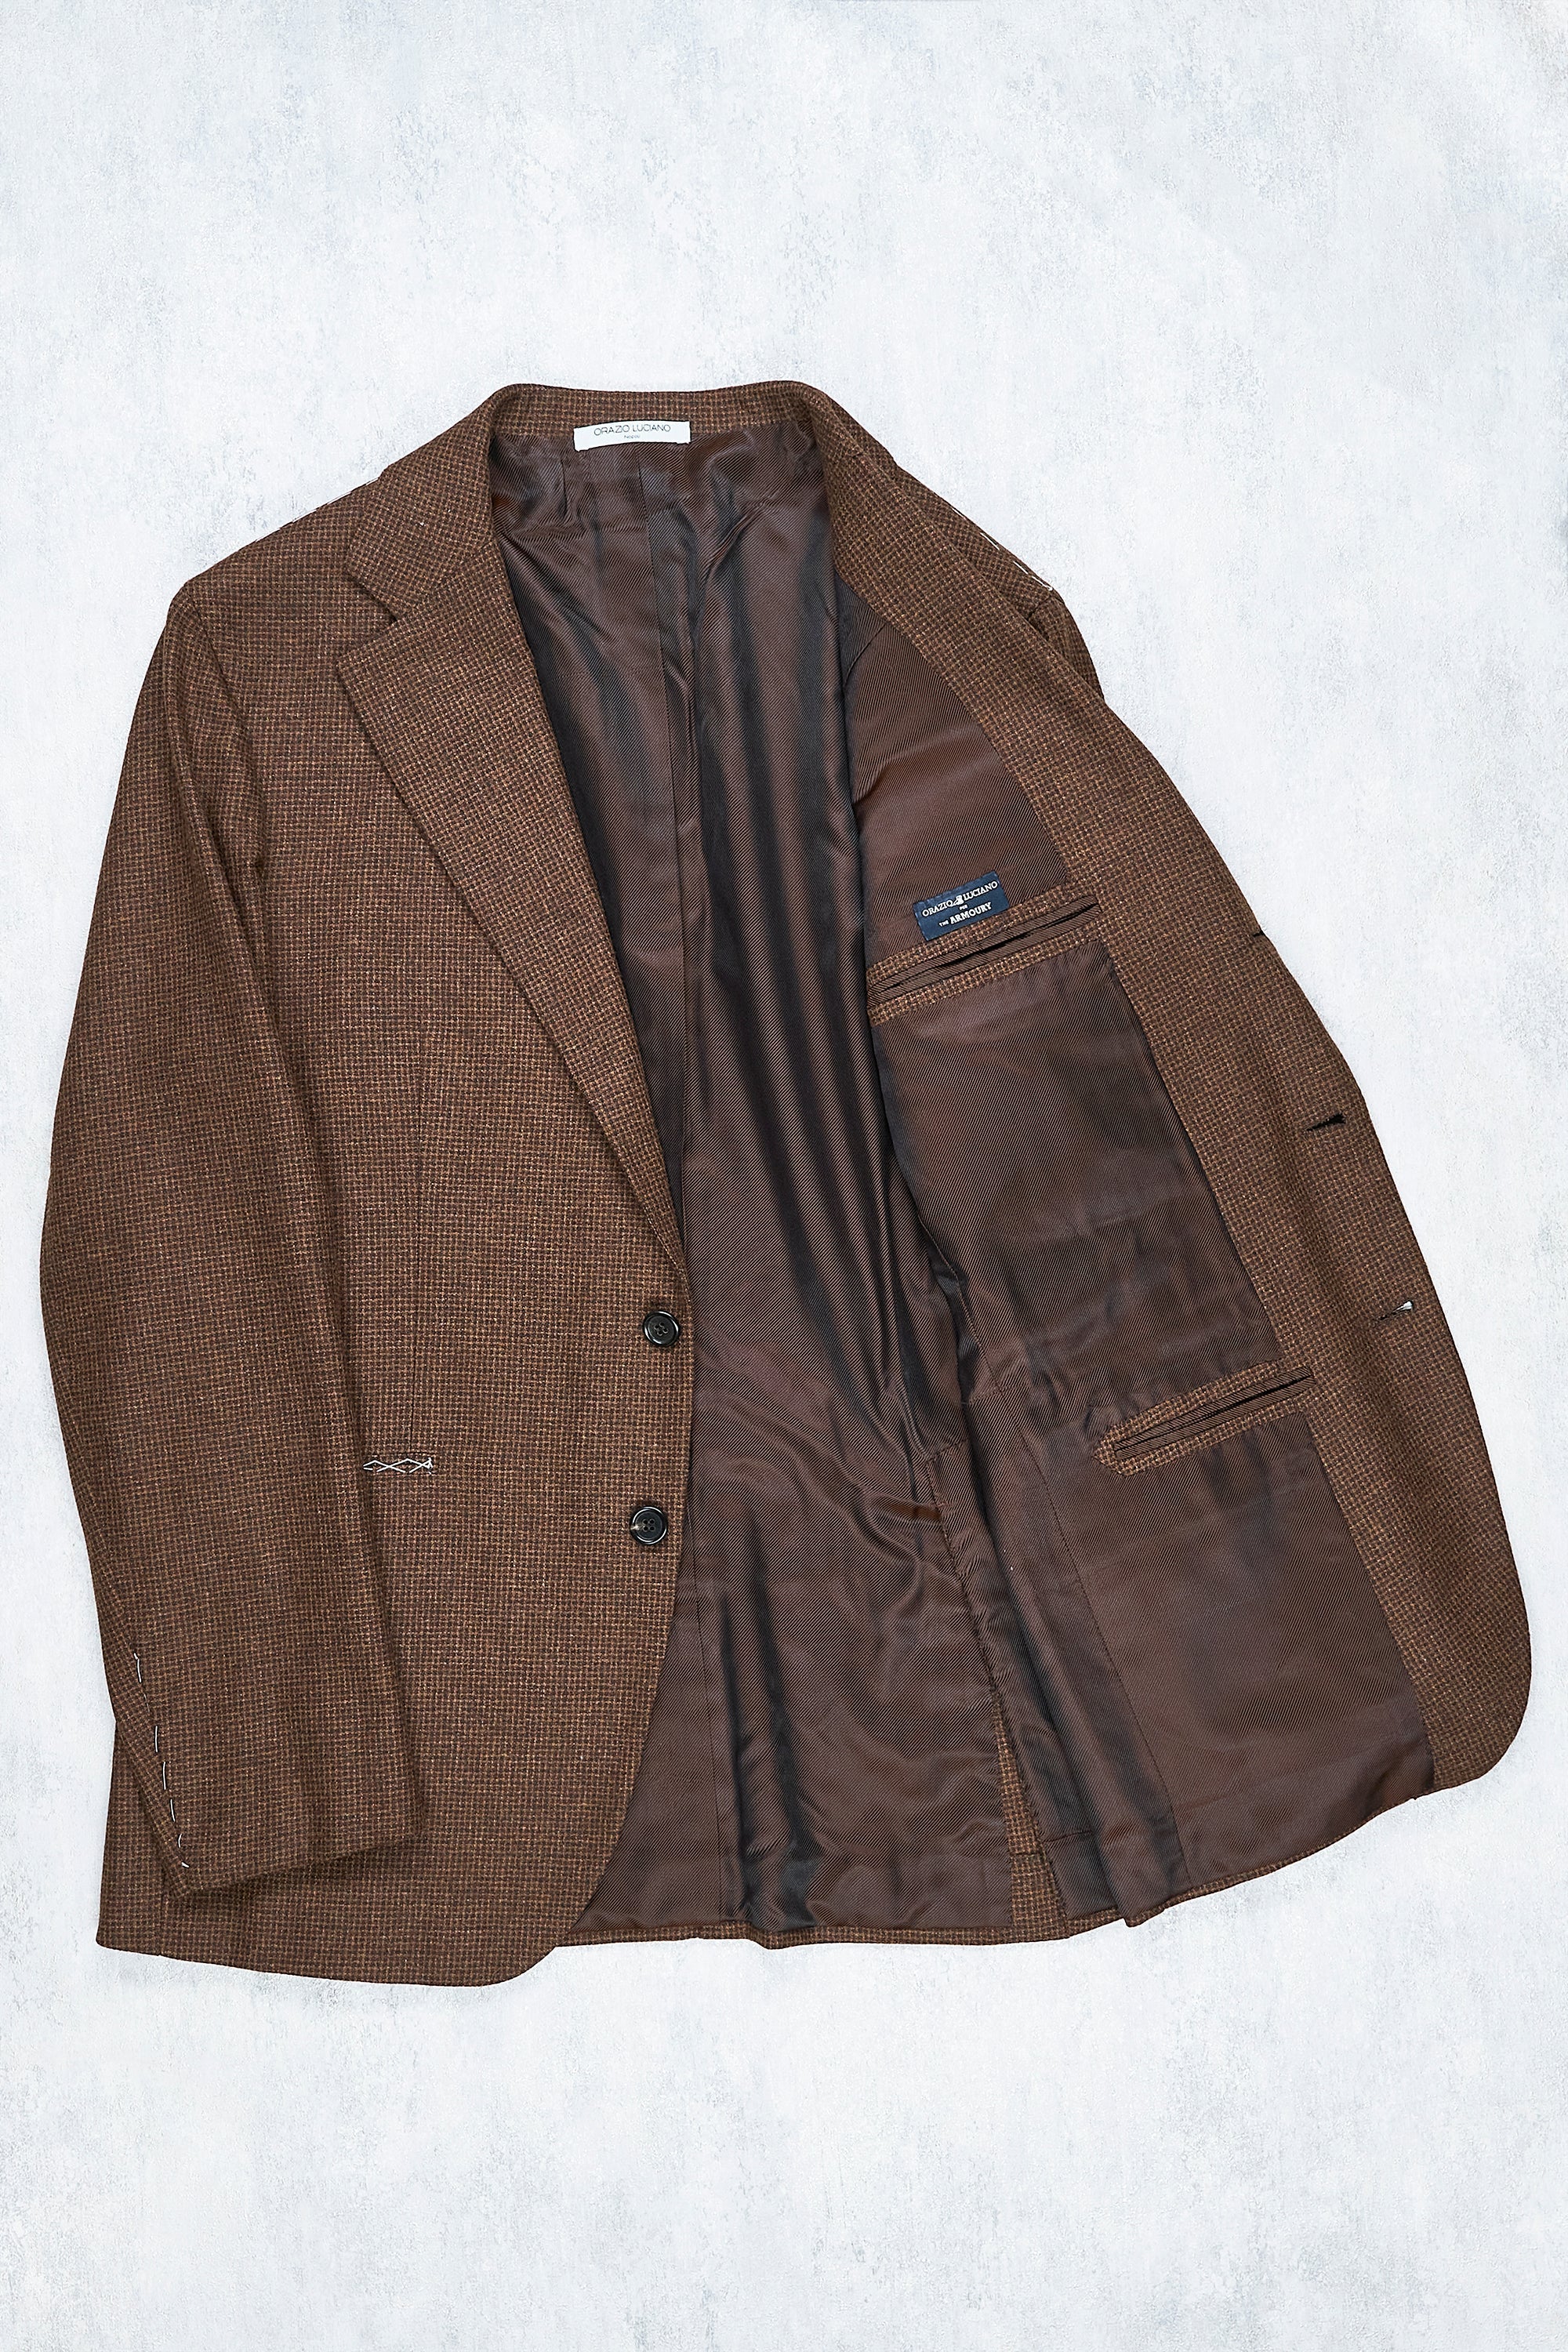 Orazio Luciano Rustic Brown Vintage Wool/Cashmere Check Suit